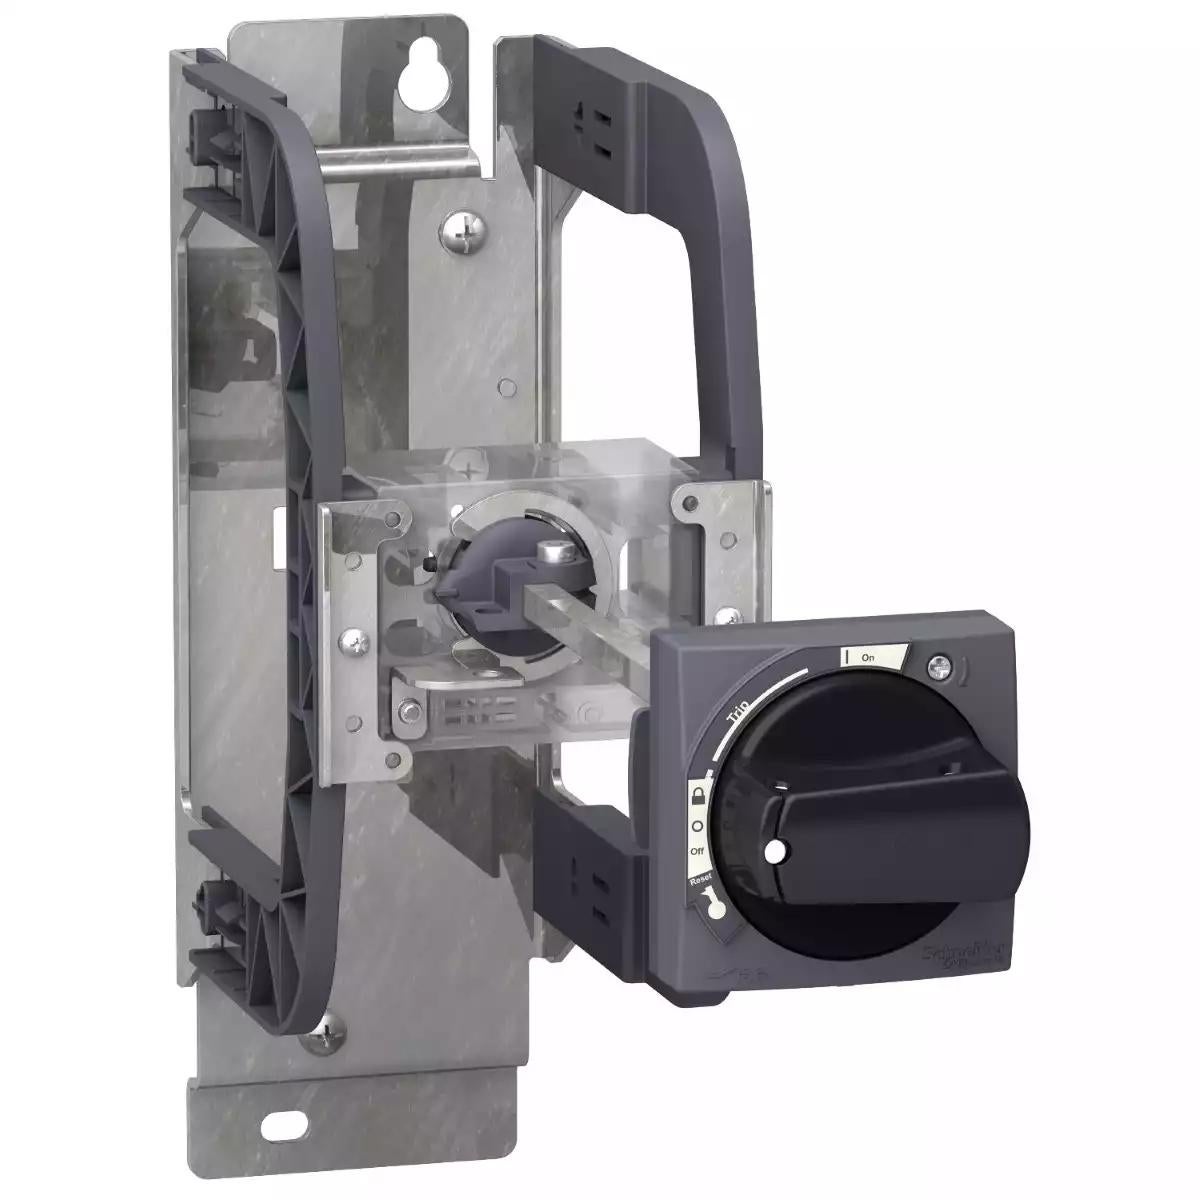 Mounting bracket kit with extended rotary handle, TeSys Ultra, IP54, black handle, with trip indication, for LUB